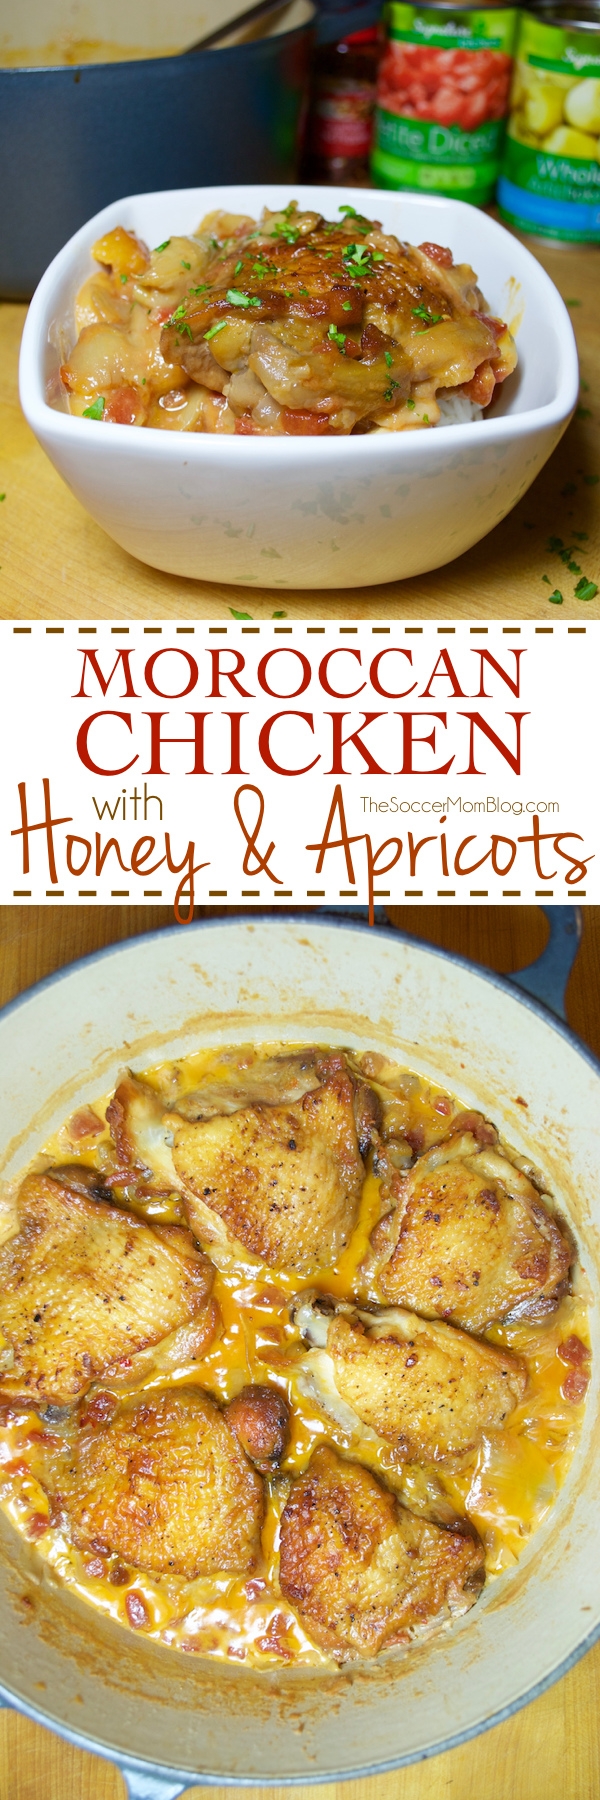 Rich Moroccan Chicken stew is the perfect mix of sweet, savory, & spicy! Recreate a favorite traditional dinner at home with this surprisingly easy recipe.